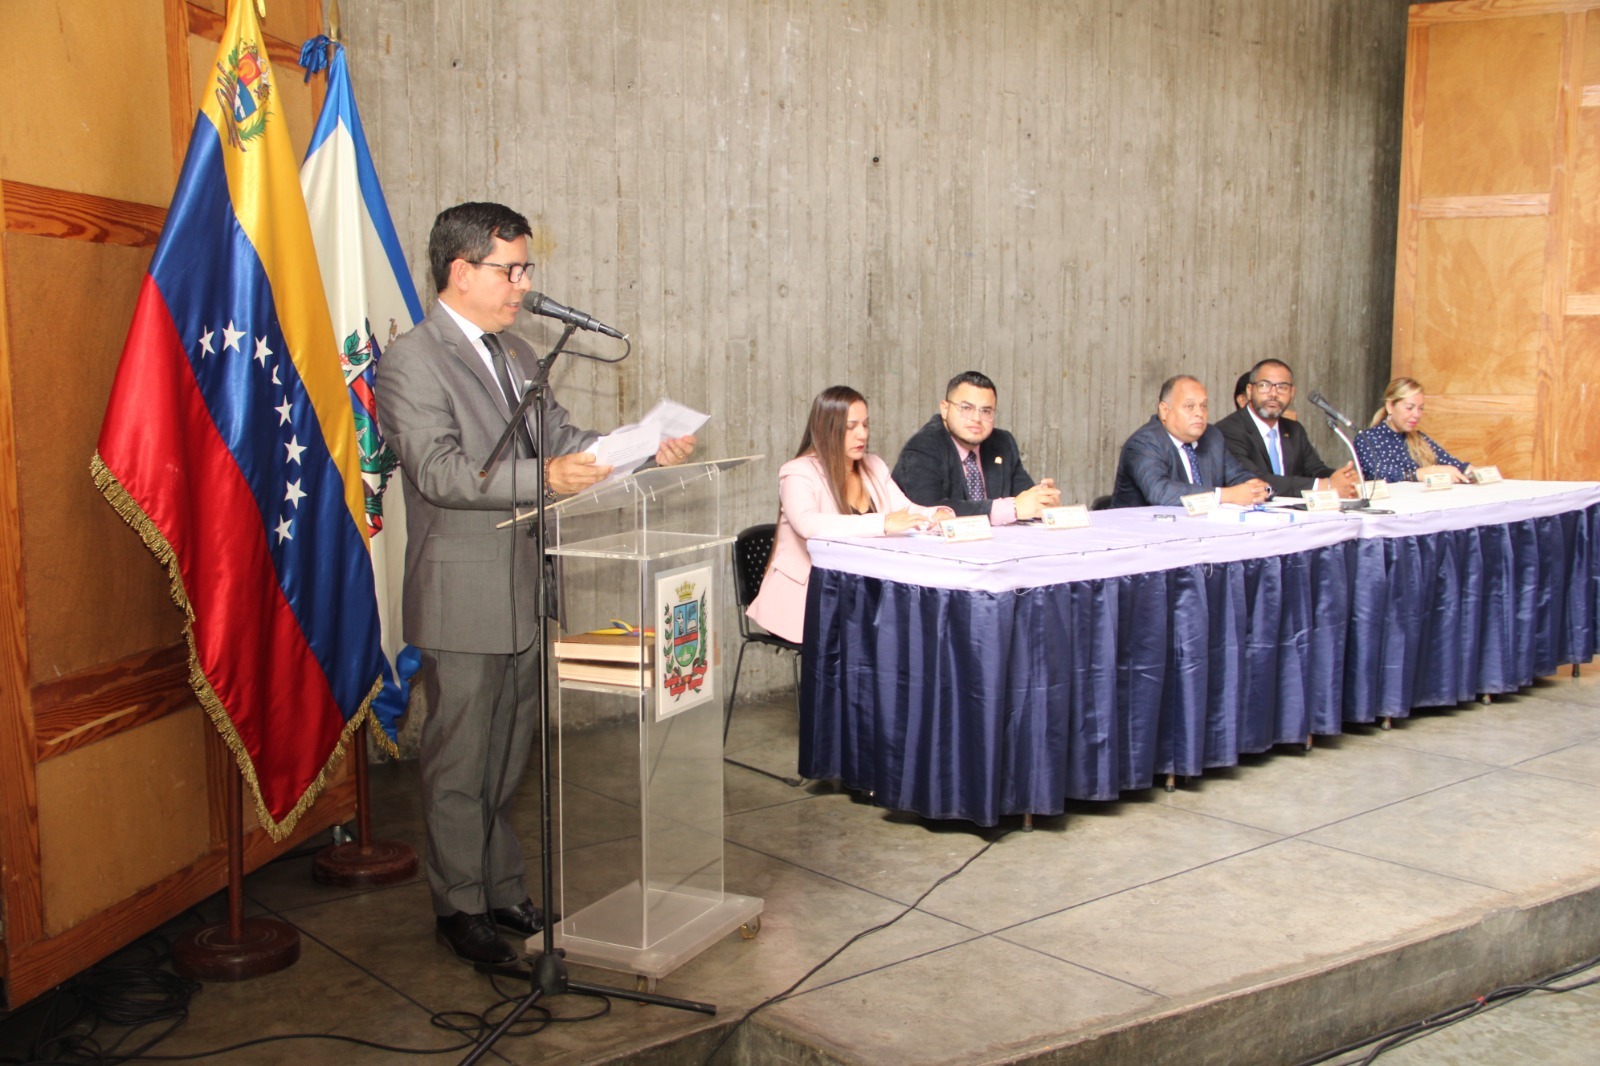 Chacao is the first municipality with a legal framework for the implementation of the Sustainable Development Goals (SDGs), proposed by the United Nations – La Voz